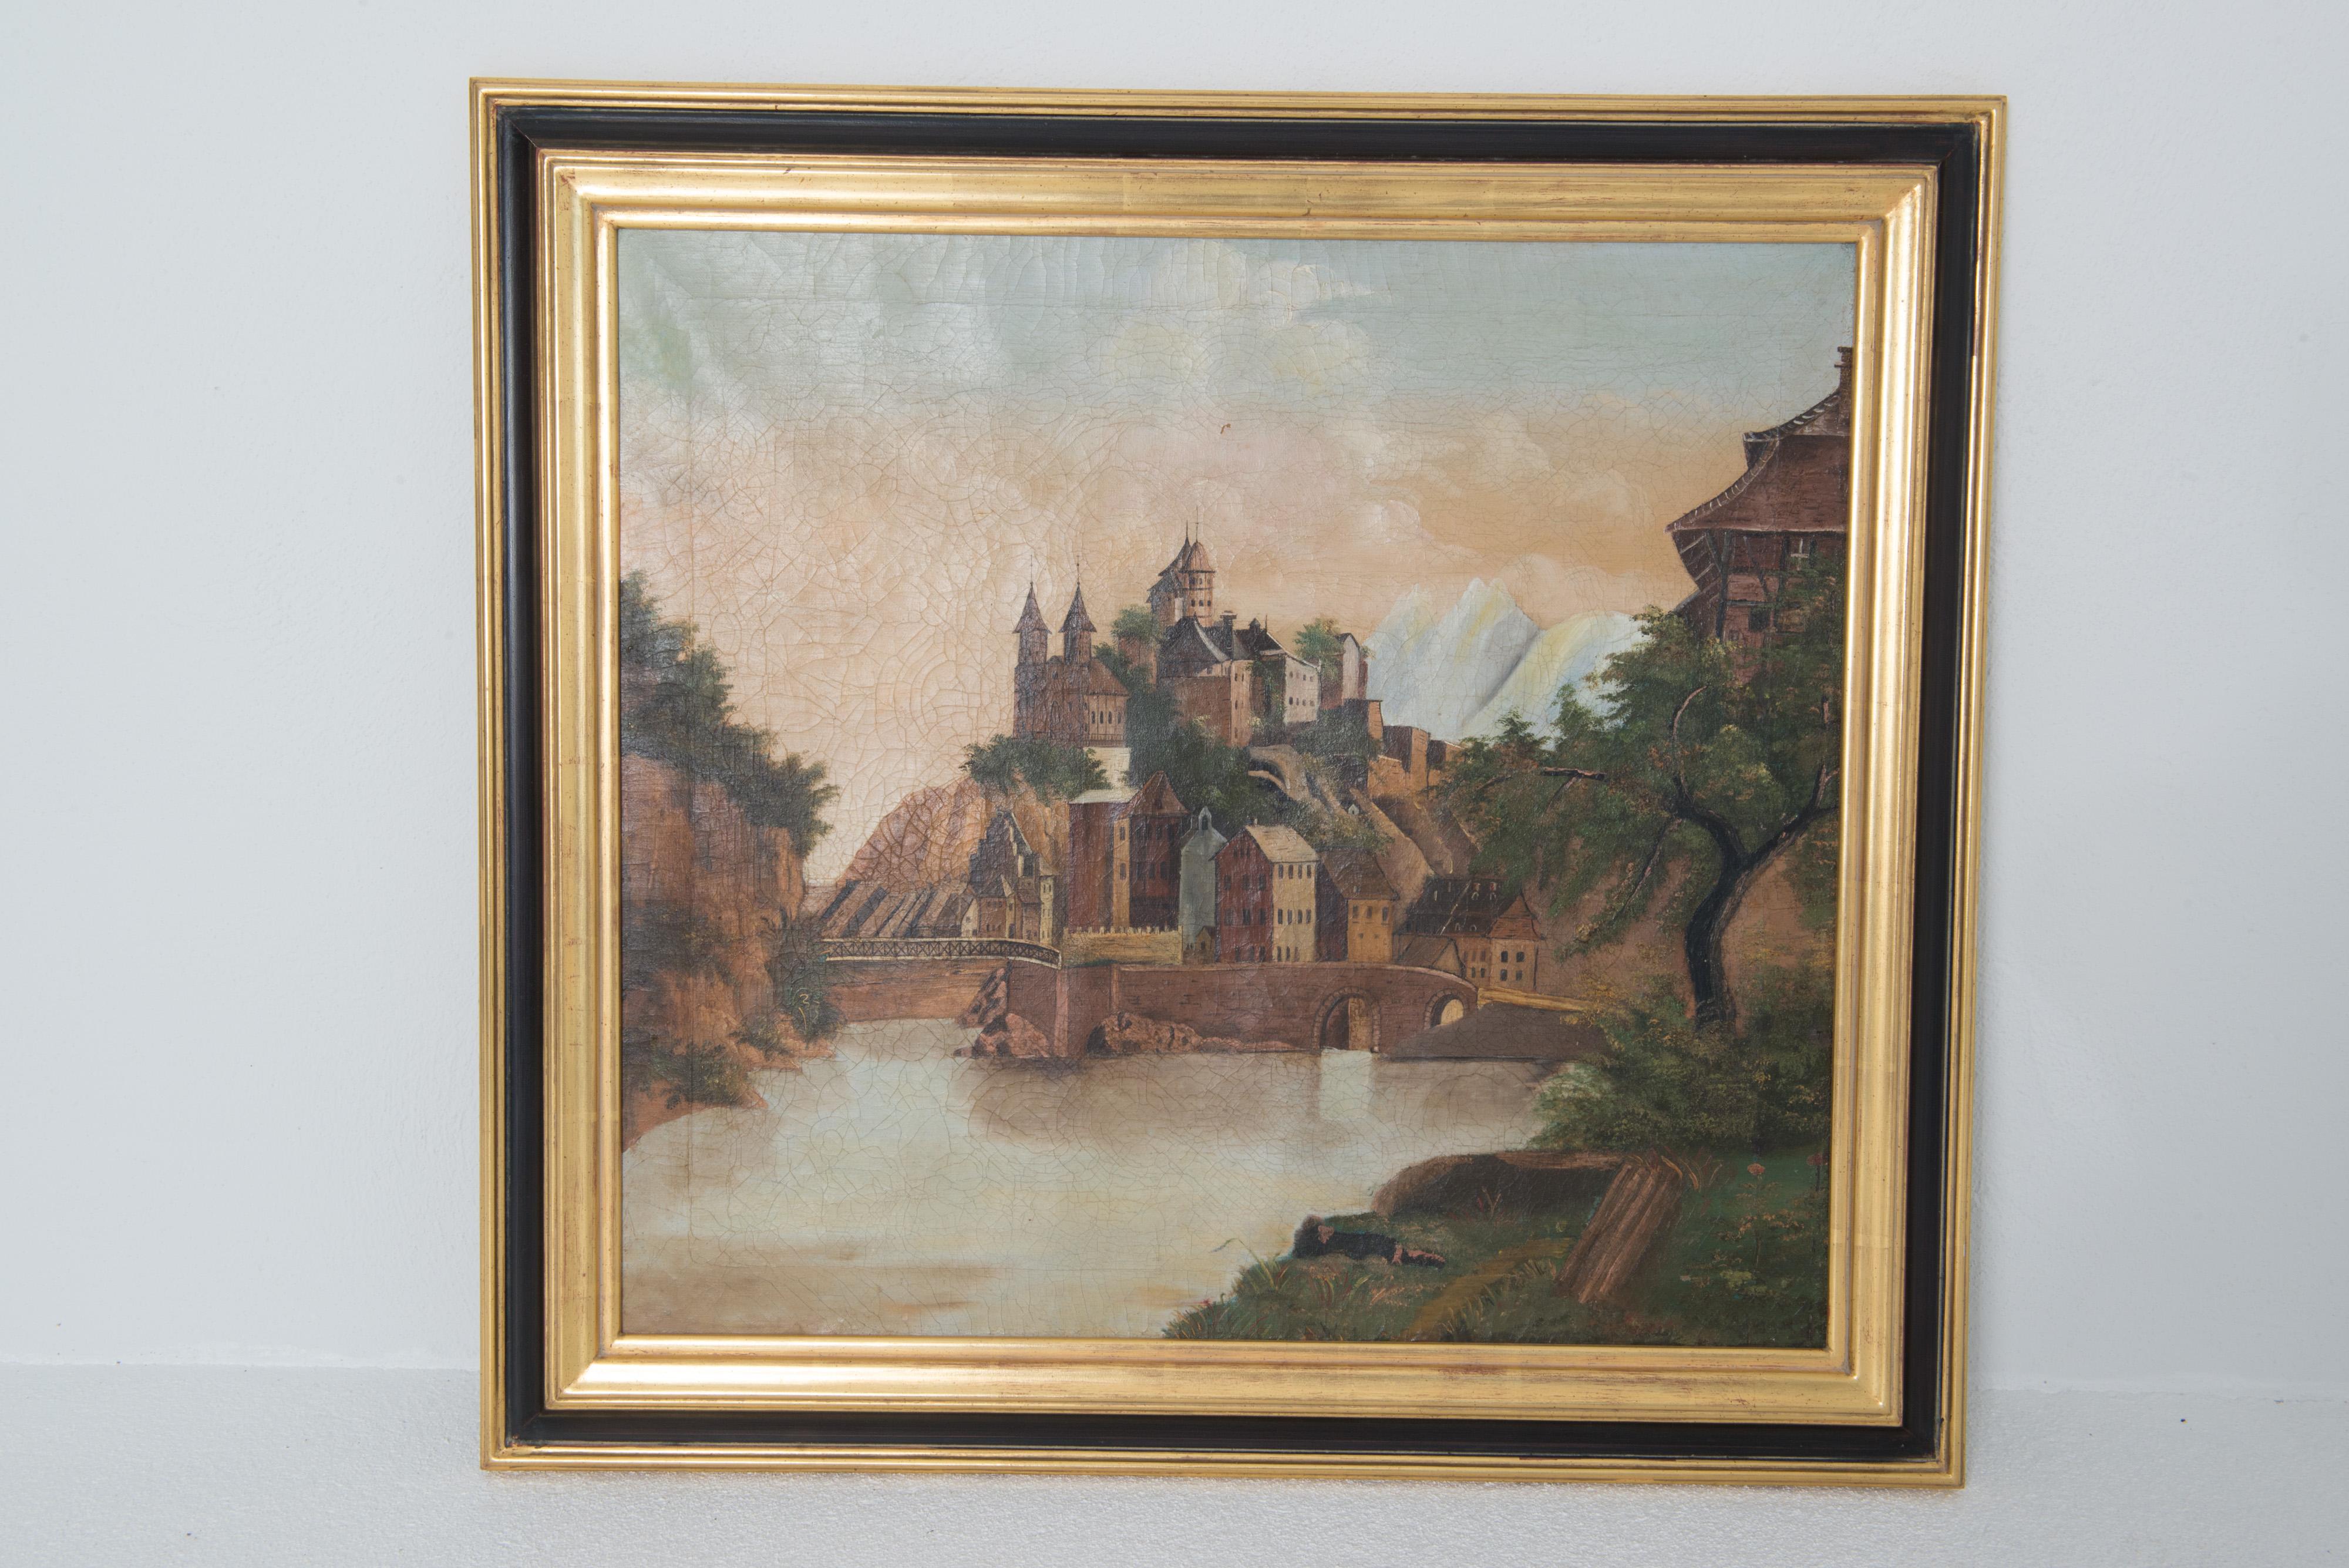 A charming oil painting on canvas depicting a French village on a hill with a castle 
atop the hill. Framed in a good quality gilt and black lacquered wood frame.